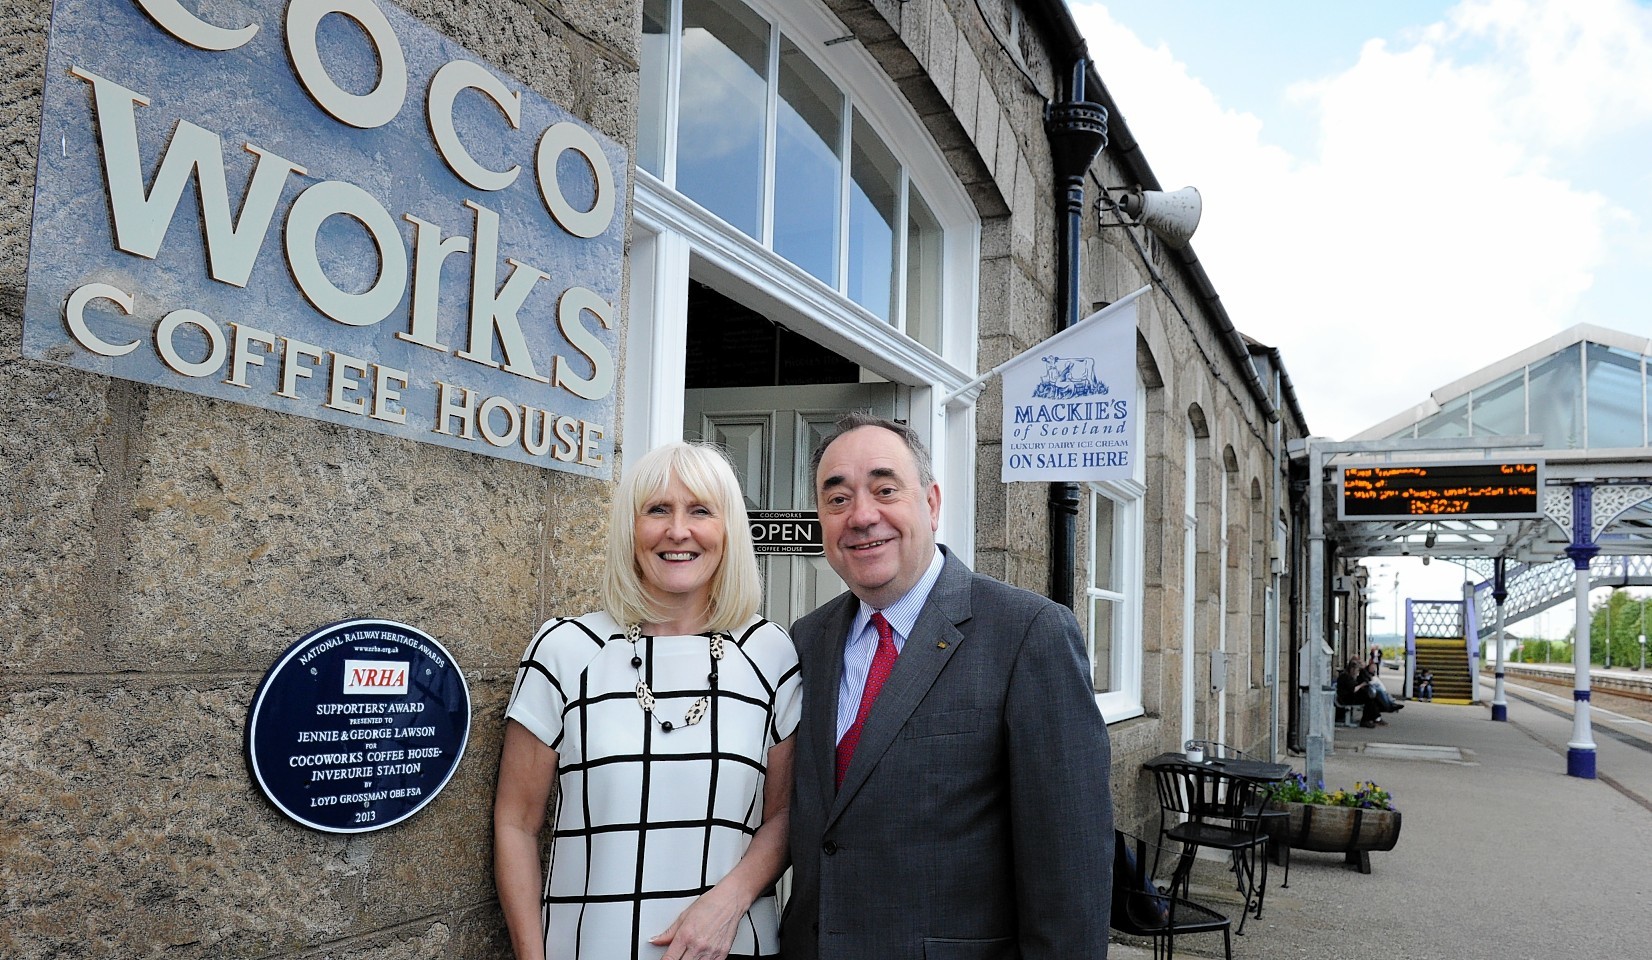 Alex Salmond with Jennie Lowson at the opening of the Coco Works, Train Staion, Inverurie